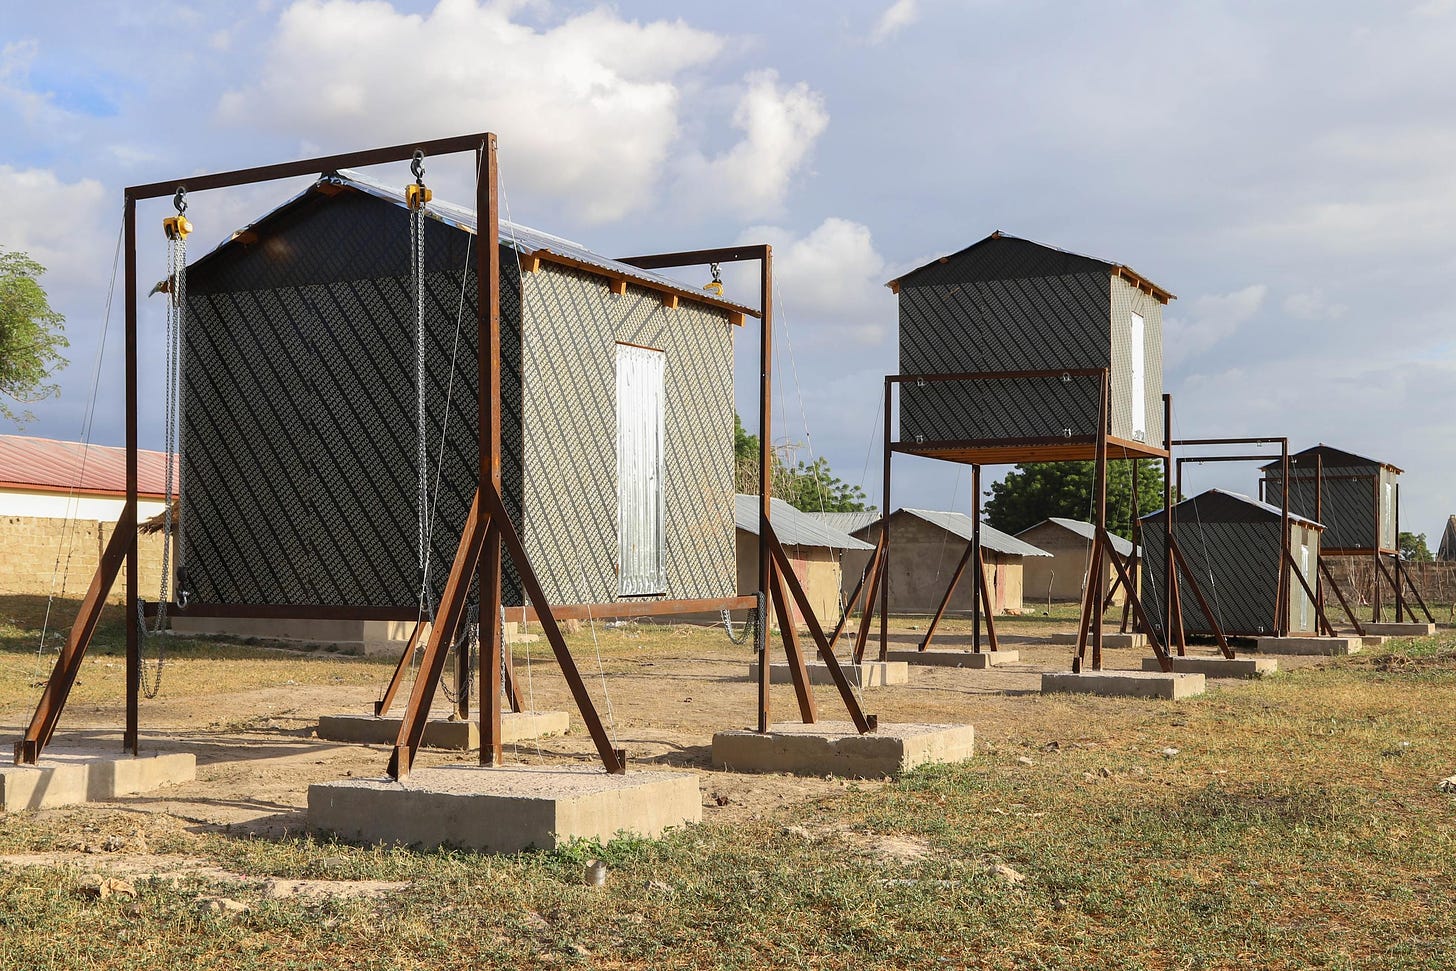 The four adjustable-height huts utilized in the study